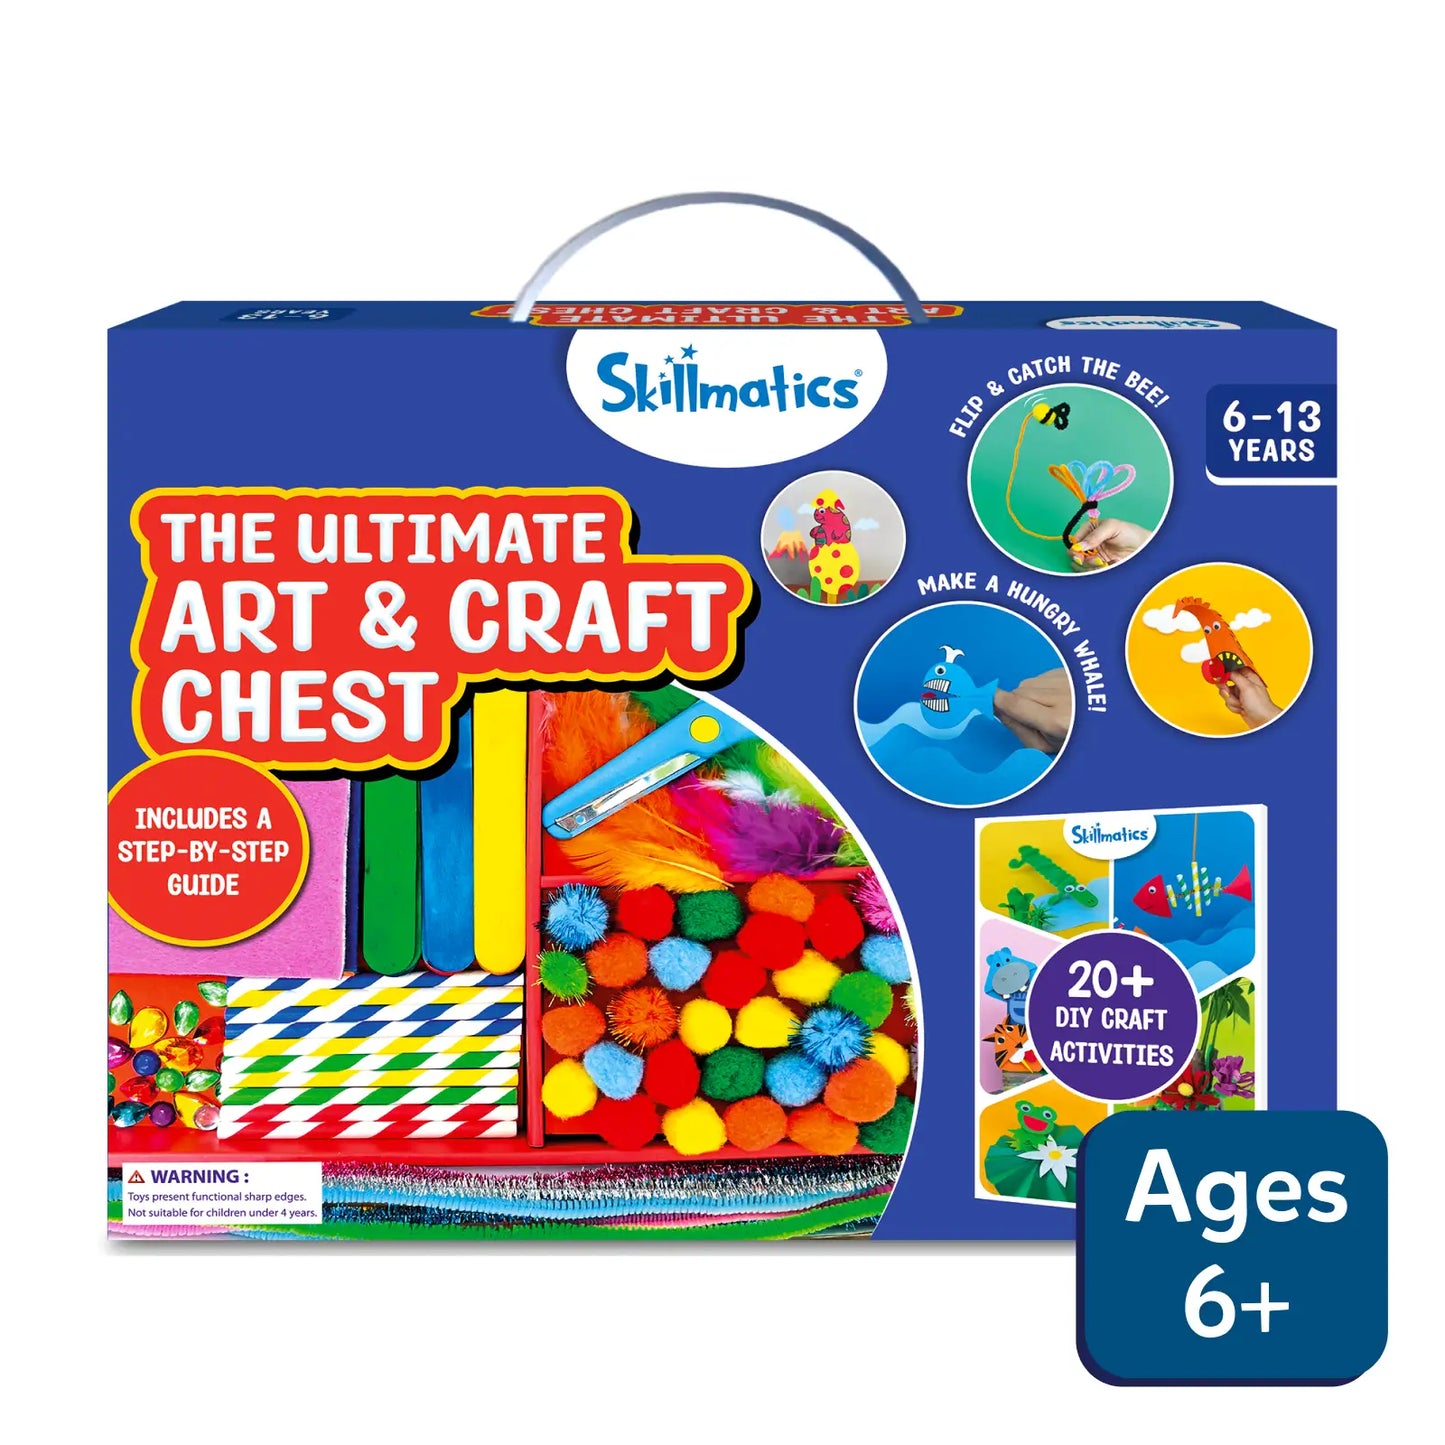 Ultimate Art & Craft Activity Chest (for ages 6-13) – Skillmatics